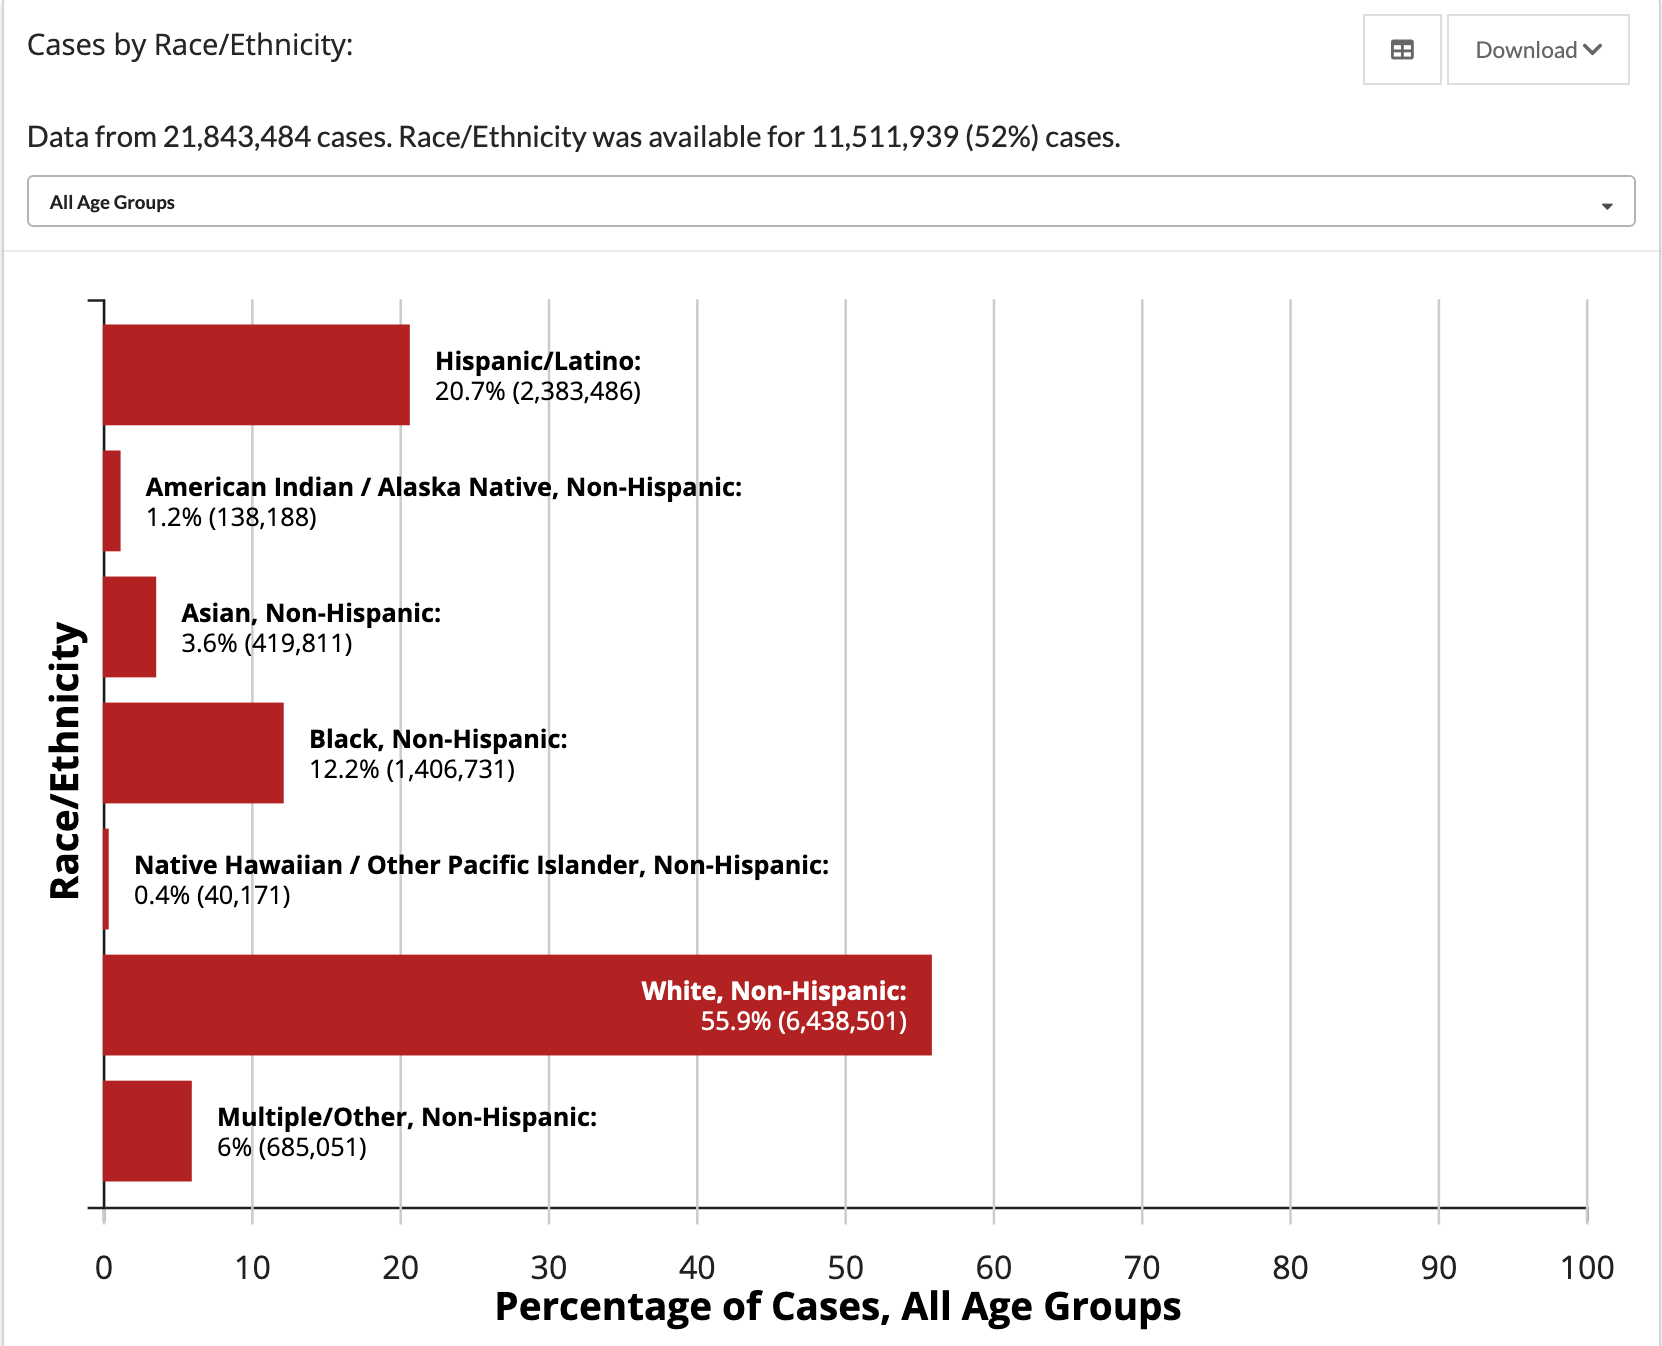 Bar graph showing the percentage of COVID-19 cases by race/ethnicity for 52% of known cases. White, non-Hispanic people are 55.9% of cases, Hispanic/Latino people are 20.7% of cases, Black, non-Hispanic people are 12.2% of cases, Asian, non-Hispanic people are 3.6% of cases, American Indian / Alaska Native people are 1.2% of cases, Native Hawaiian people are are .4% of cases, and multiple/other non-Hispanic people are 6% of cases.